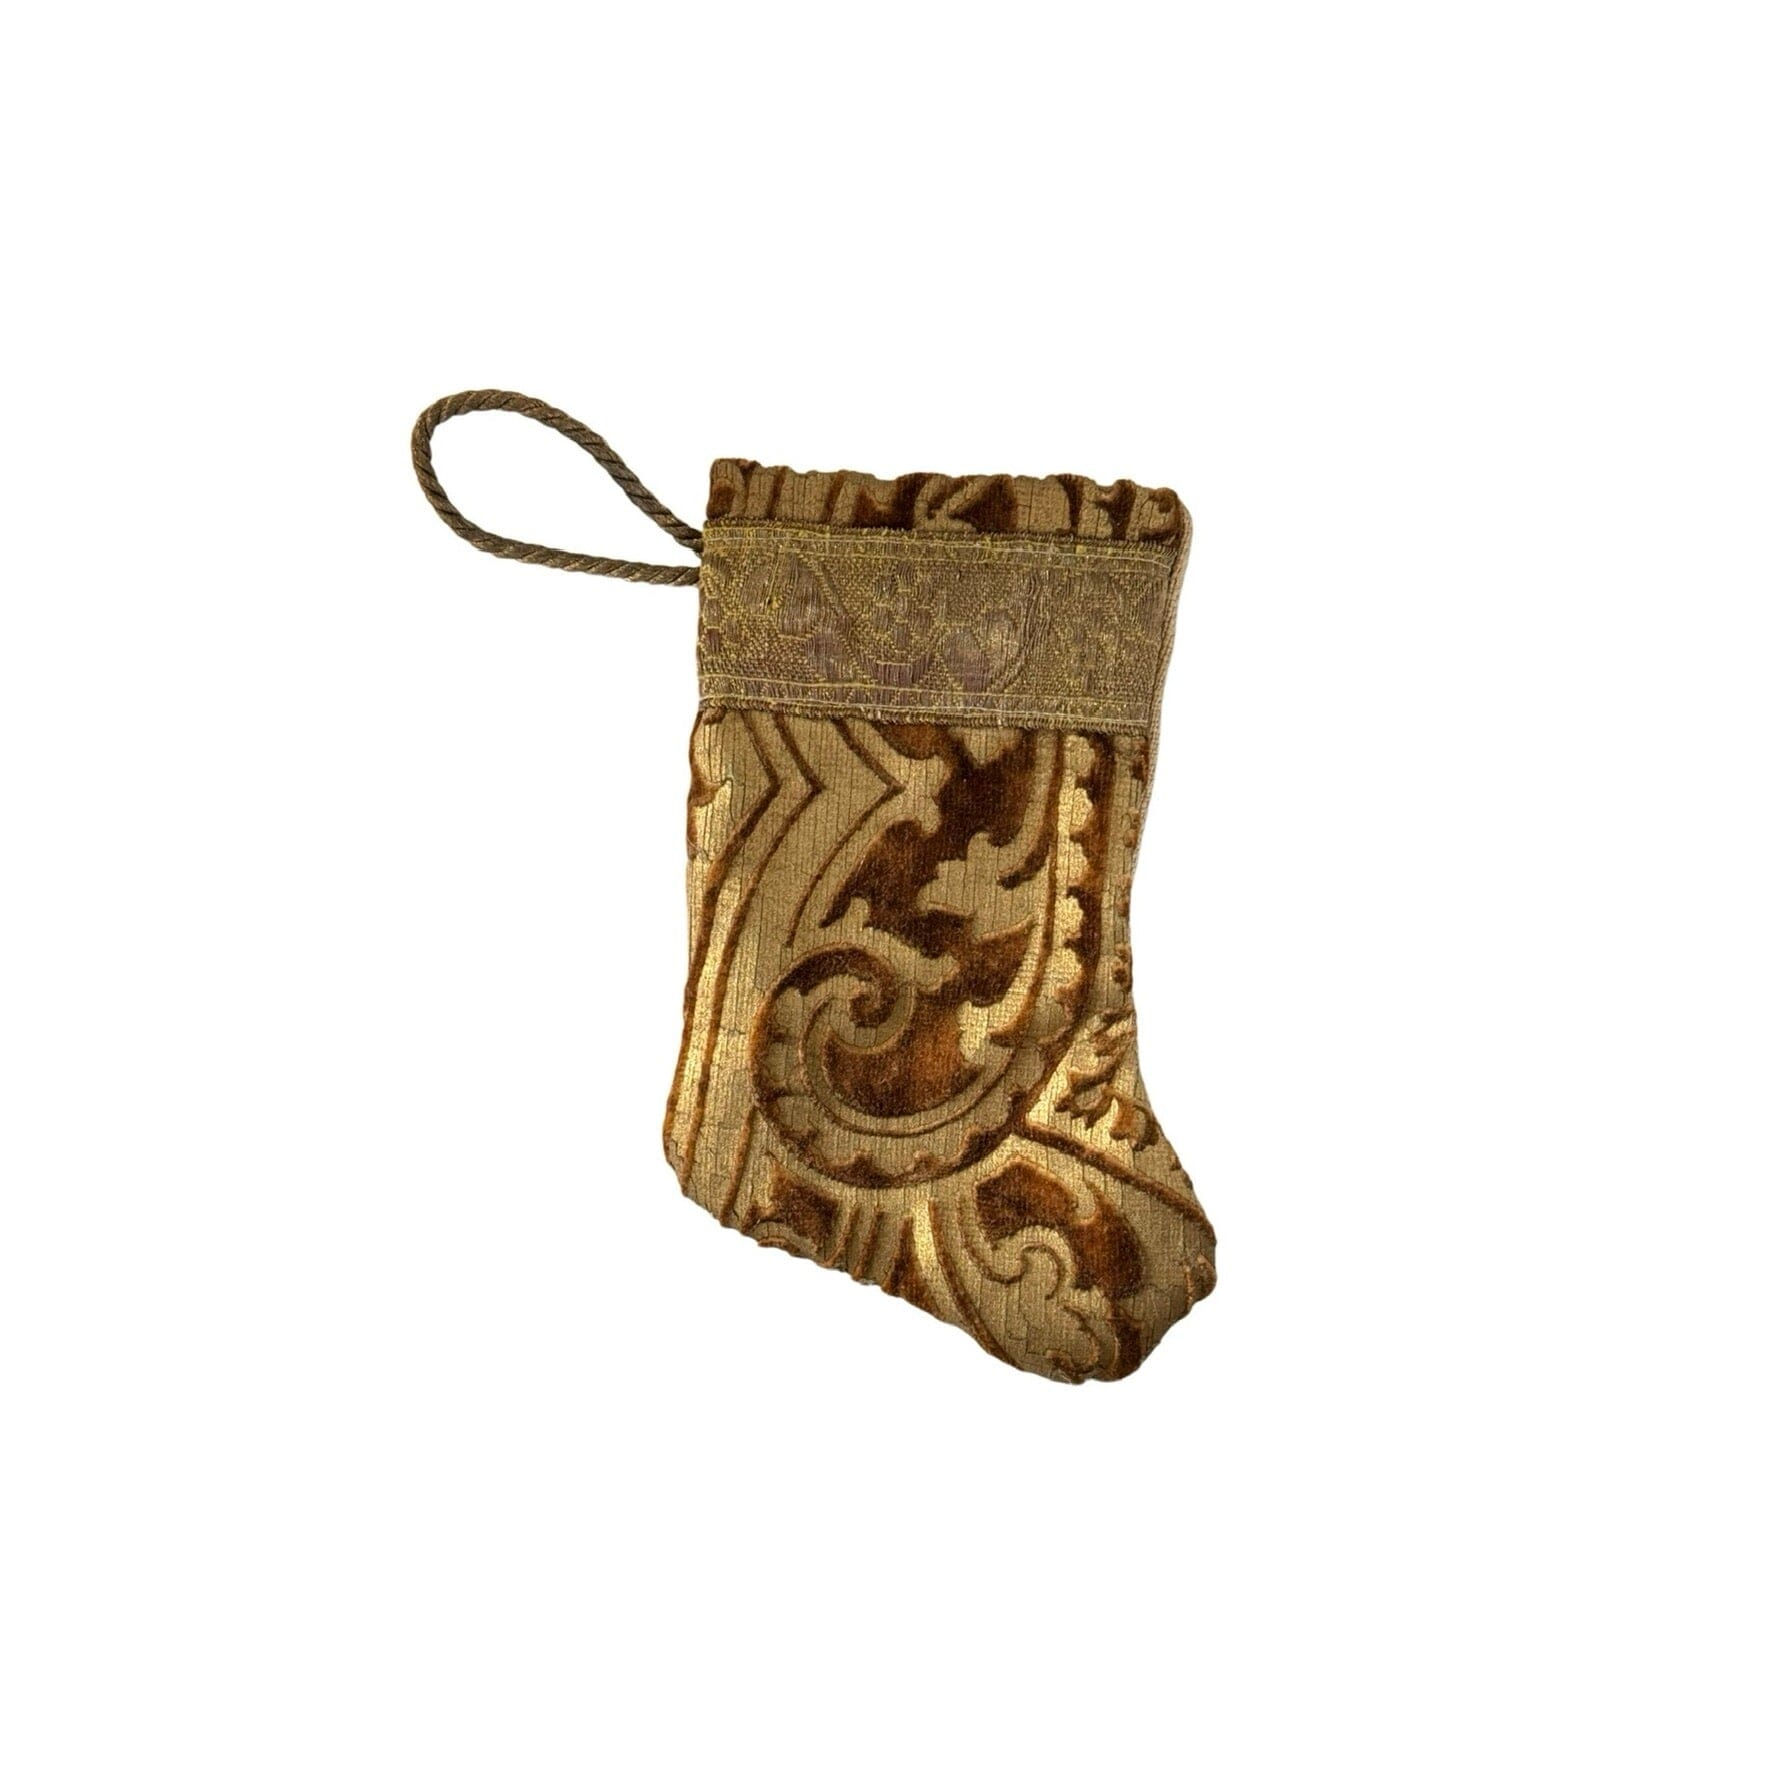 Handmade Mini Stocking Made From Vintage Fabric and Trims- Brown and Gold Ornament B. Viz Design H 